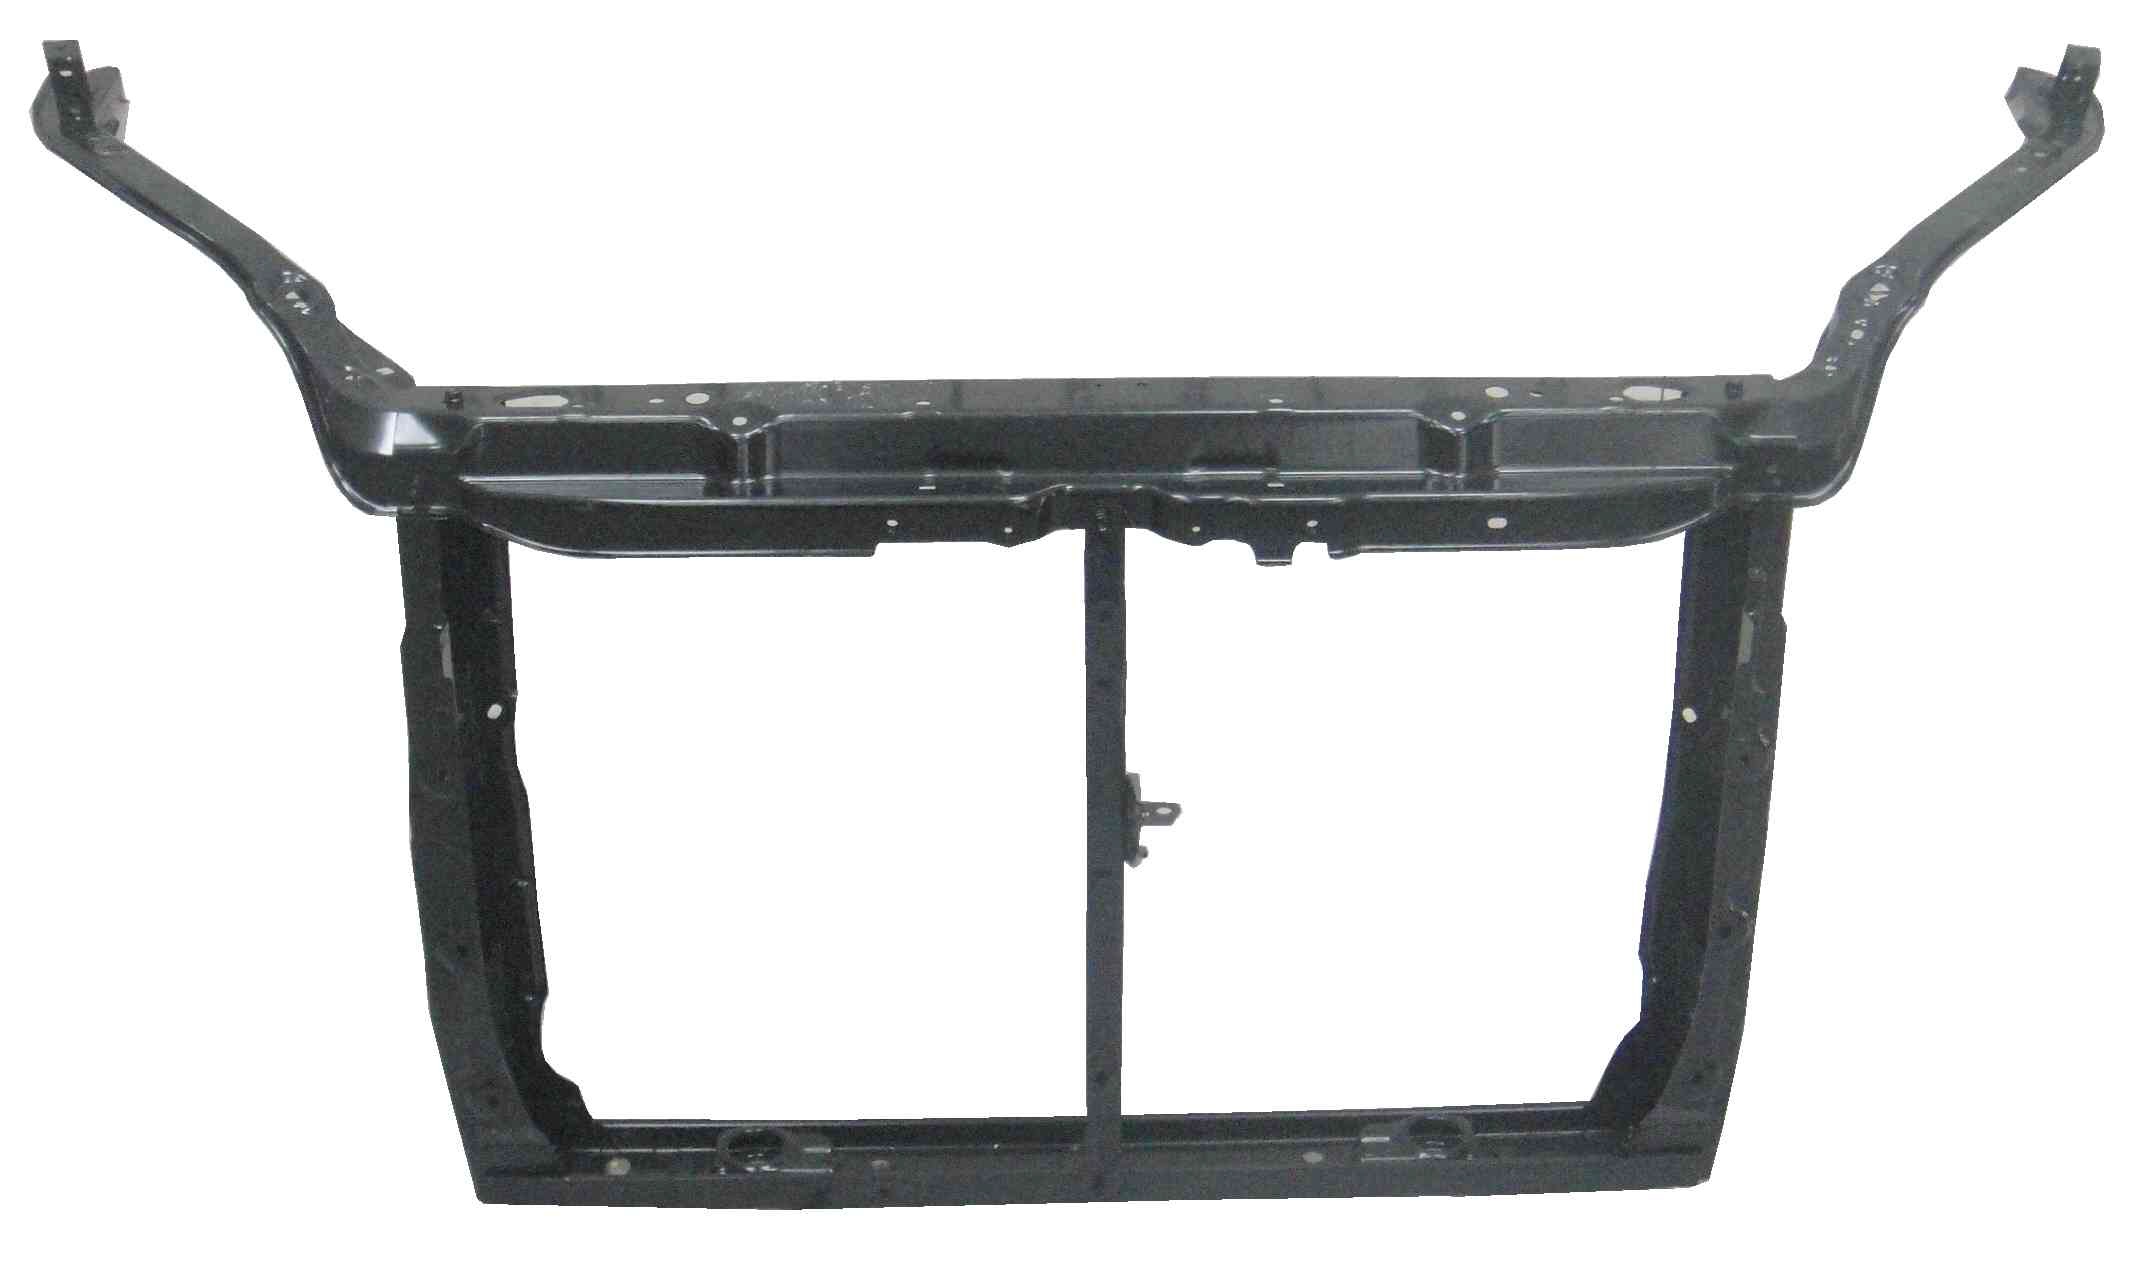 SIENNA 11-17 RADIATOR Support Assembly ALL